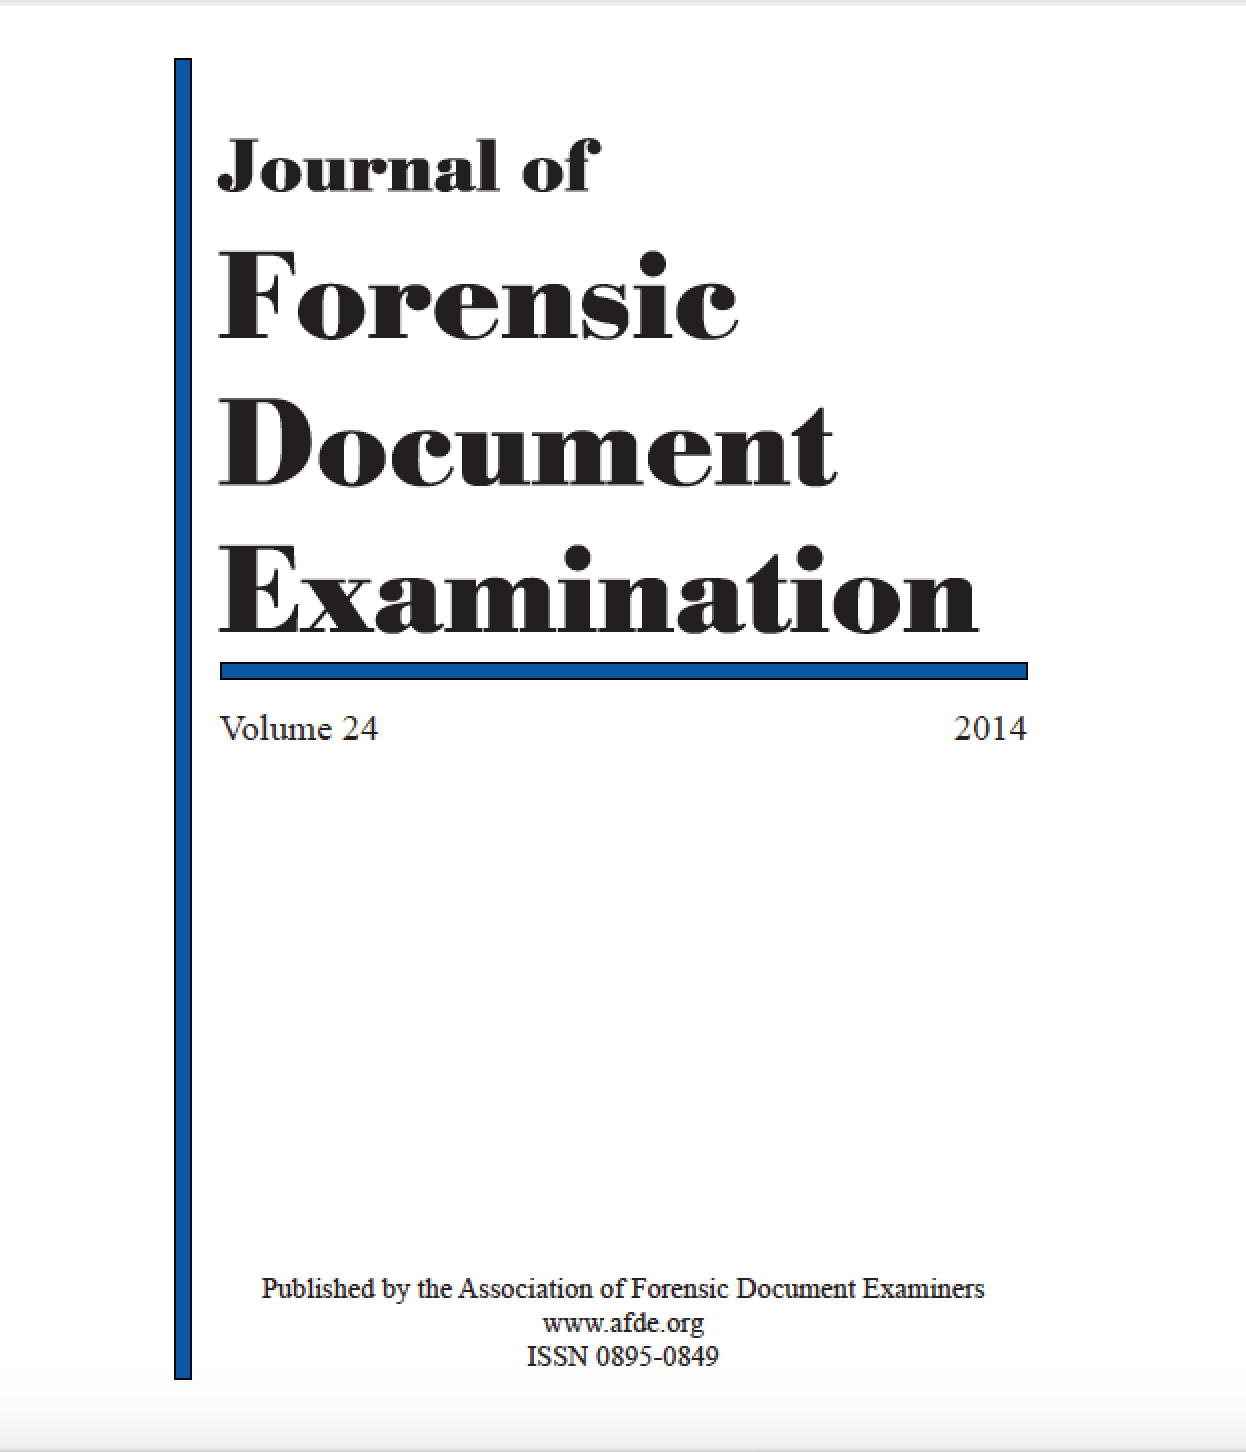 					View Vol. 24 (2014): Journal of Forensic Document Examination
				